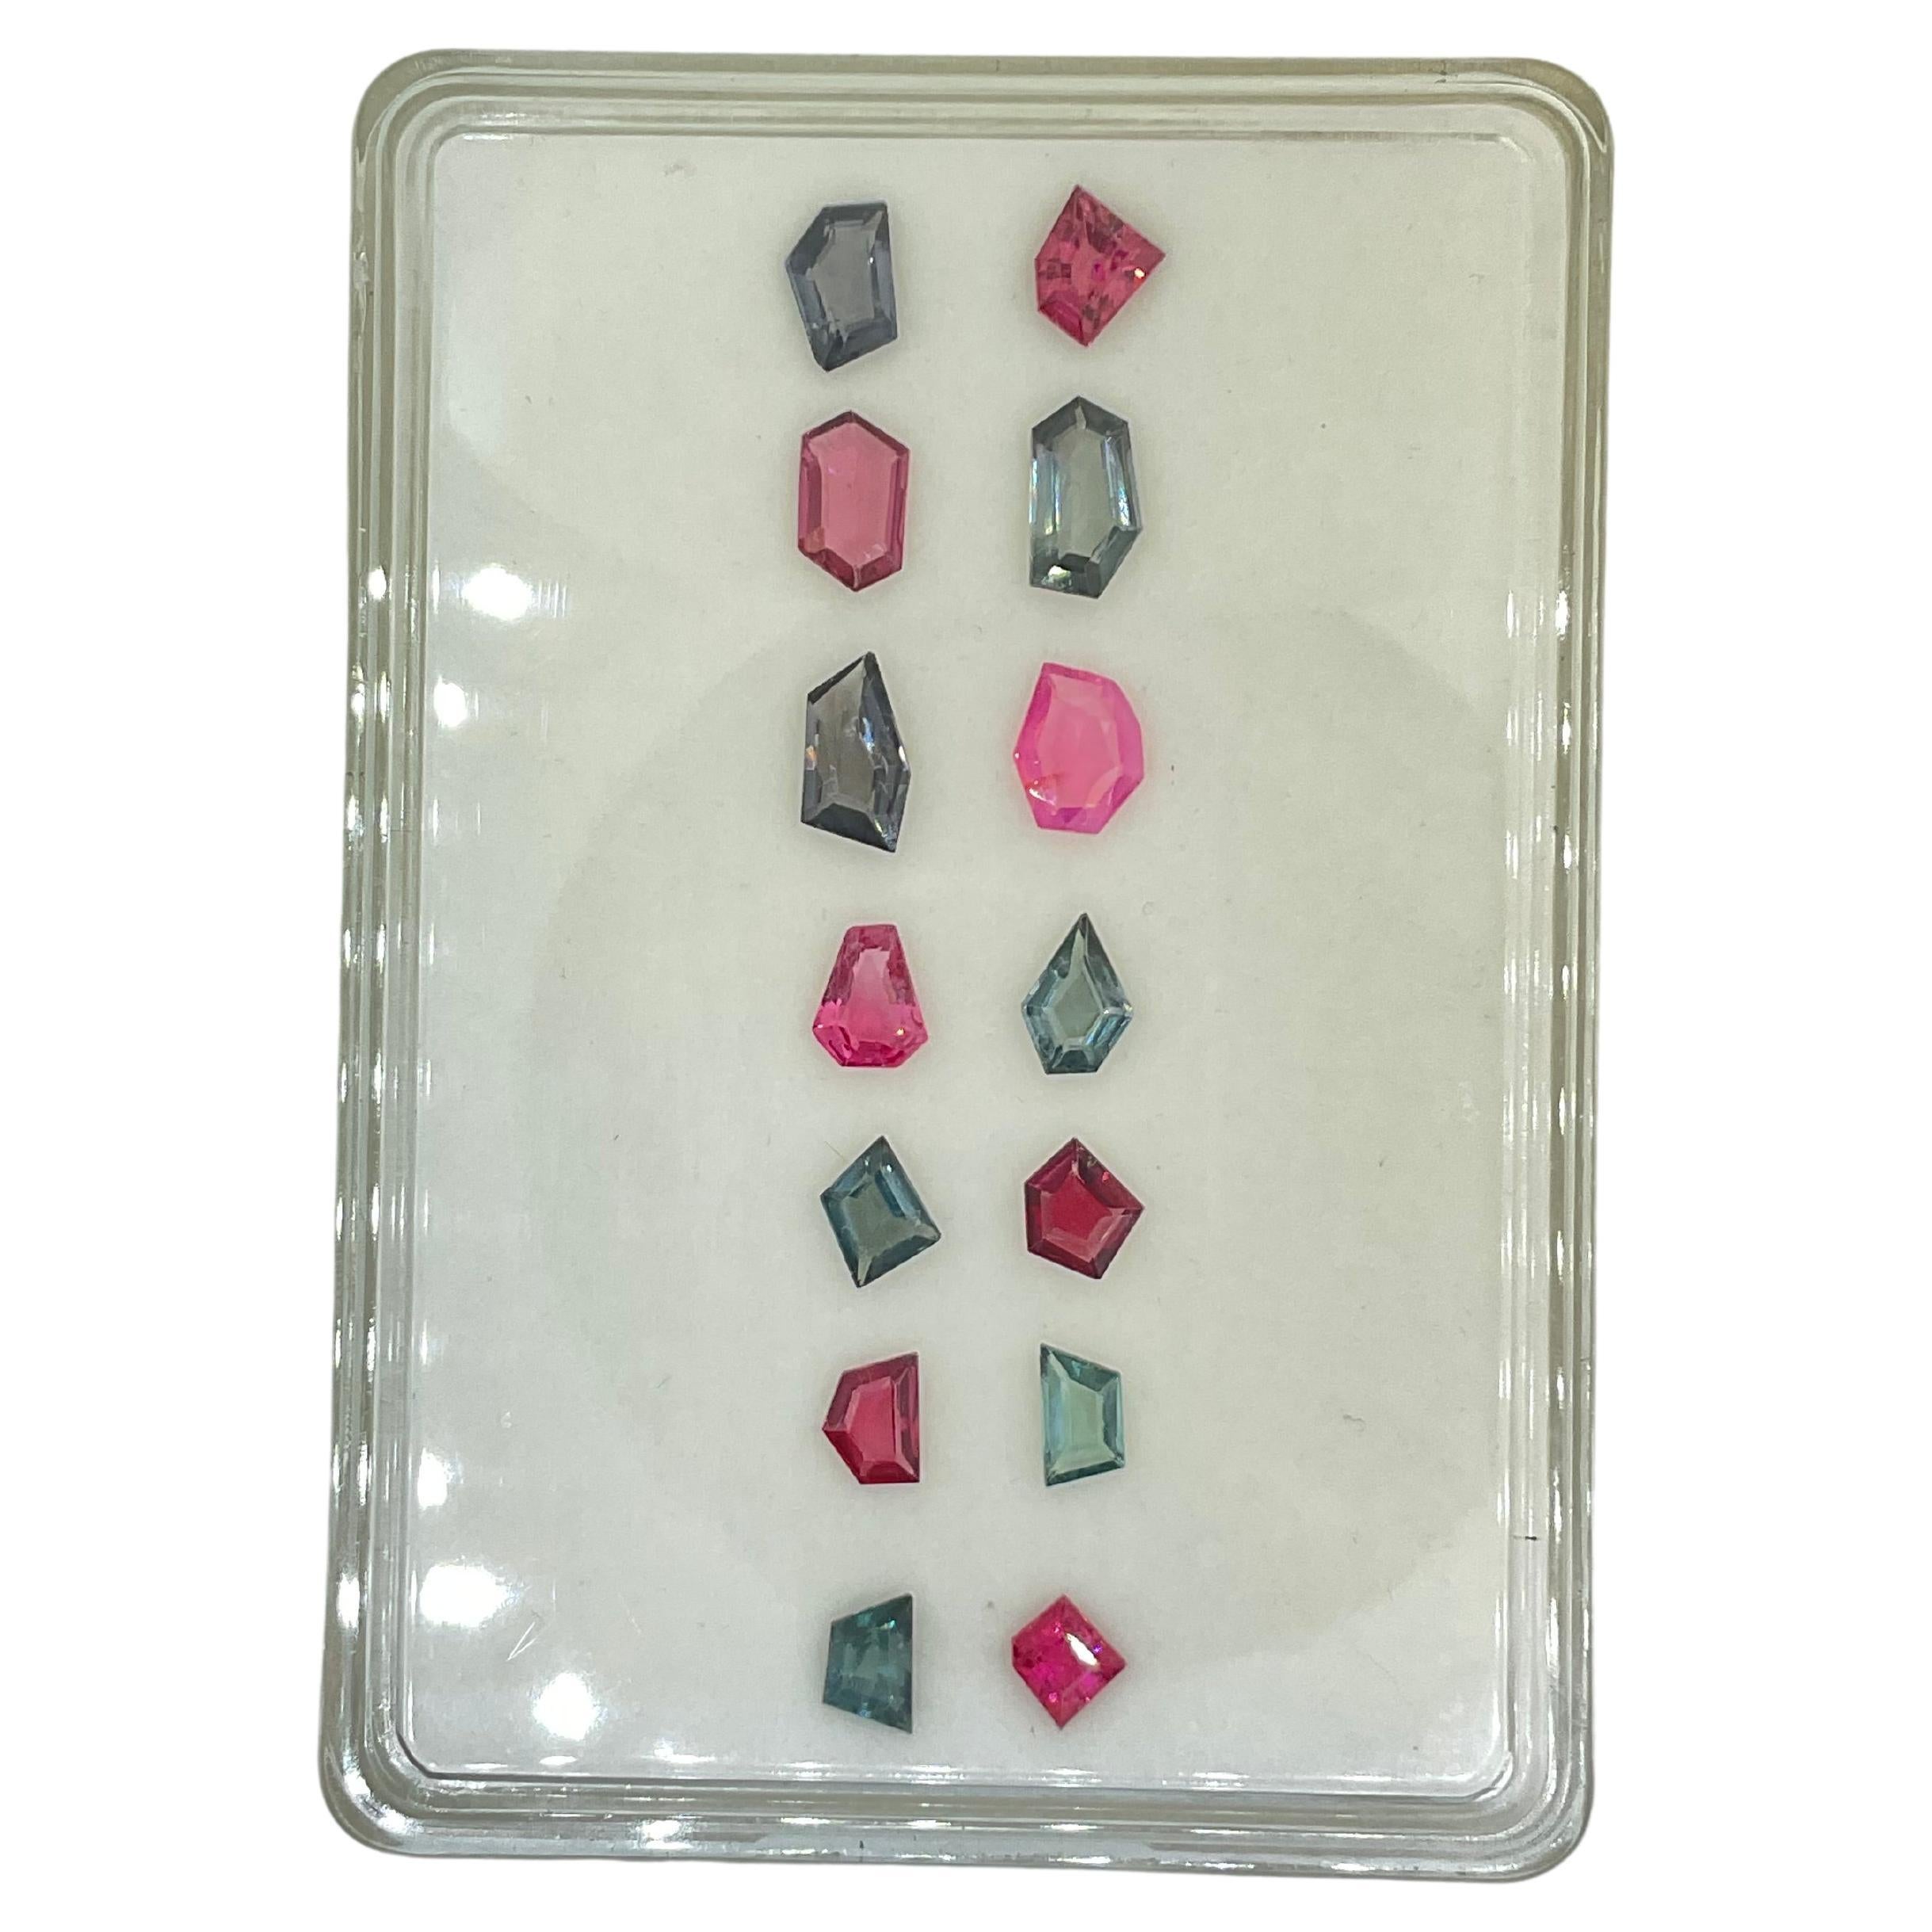 10.30 Carats Grey & Pink Spinel Fancy Cut Stone Natural Gem For Top Fine Jewelry